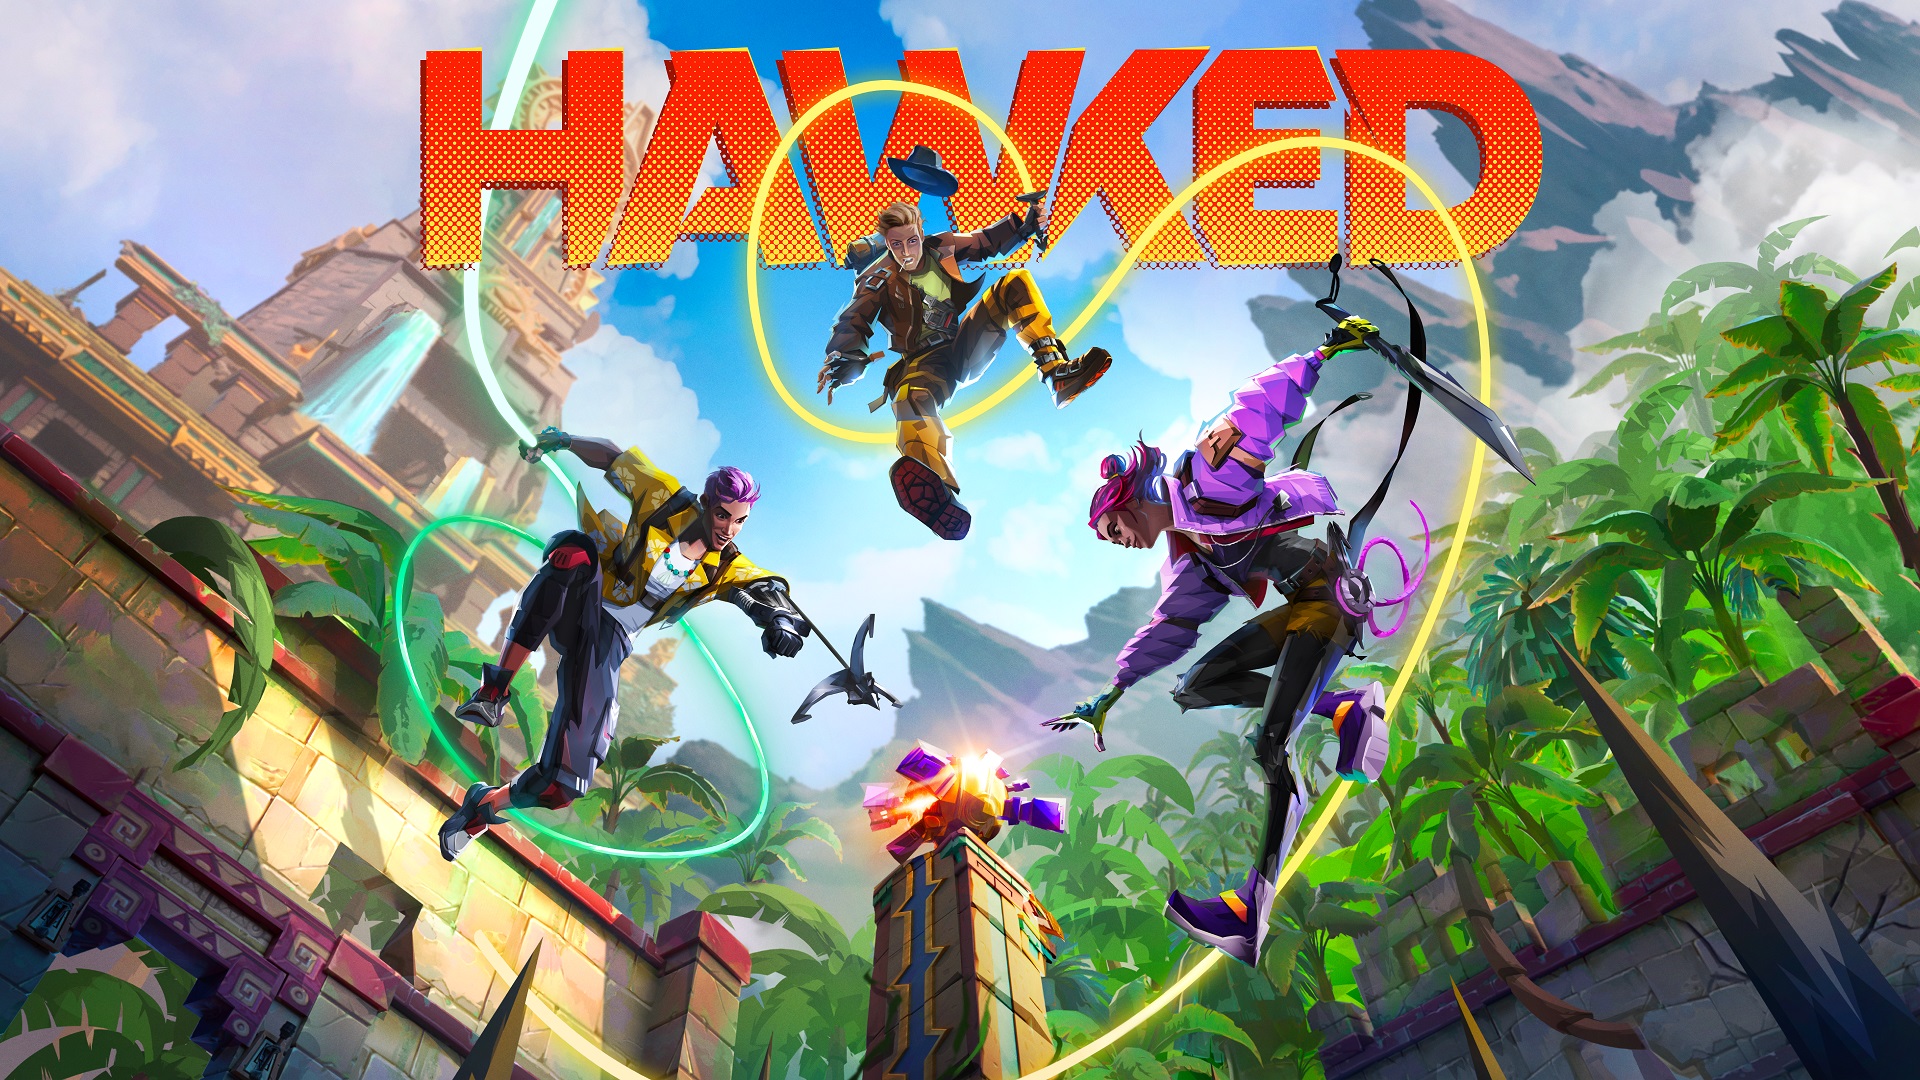 Video Game Hawked HD Wallpaper